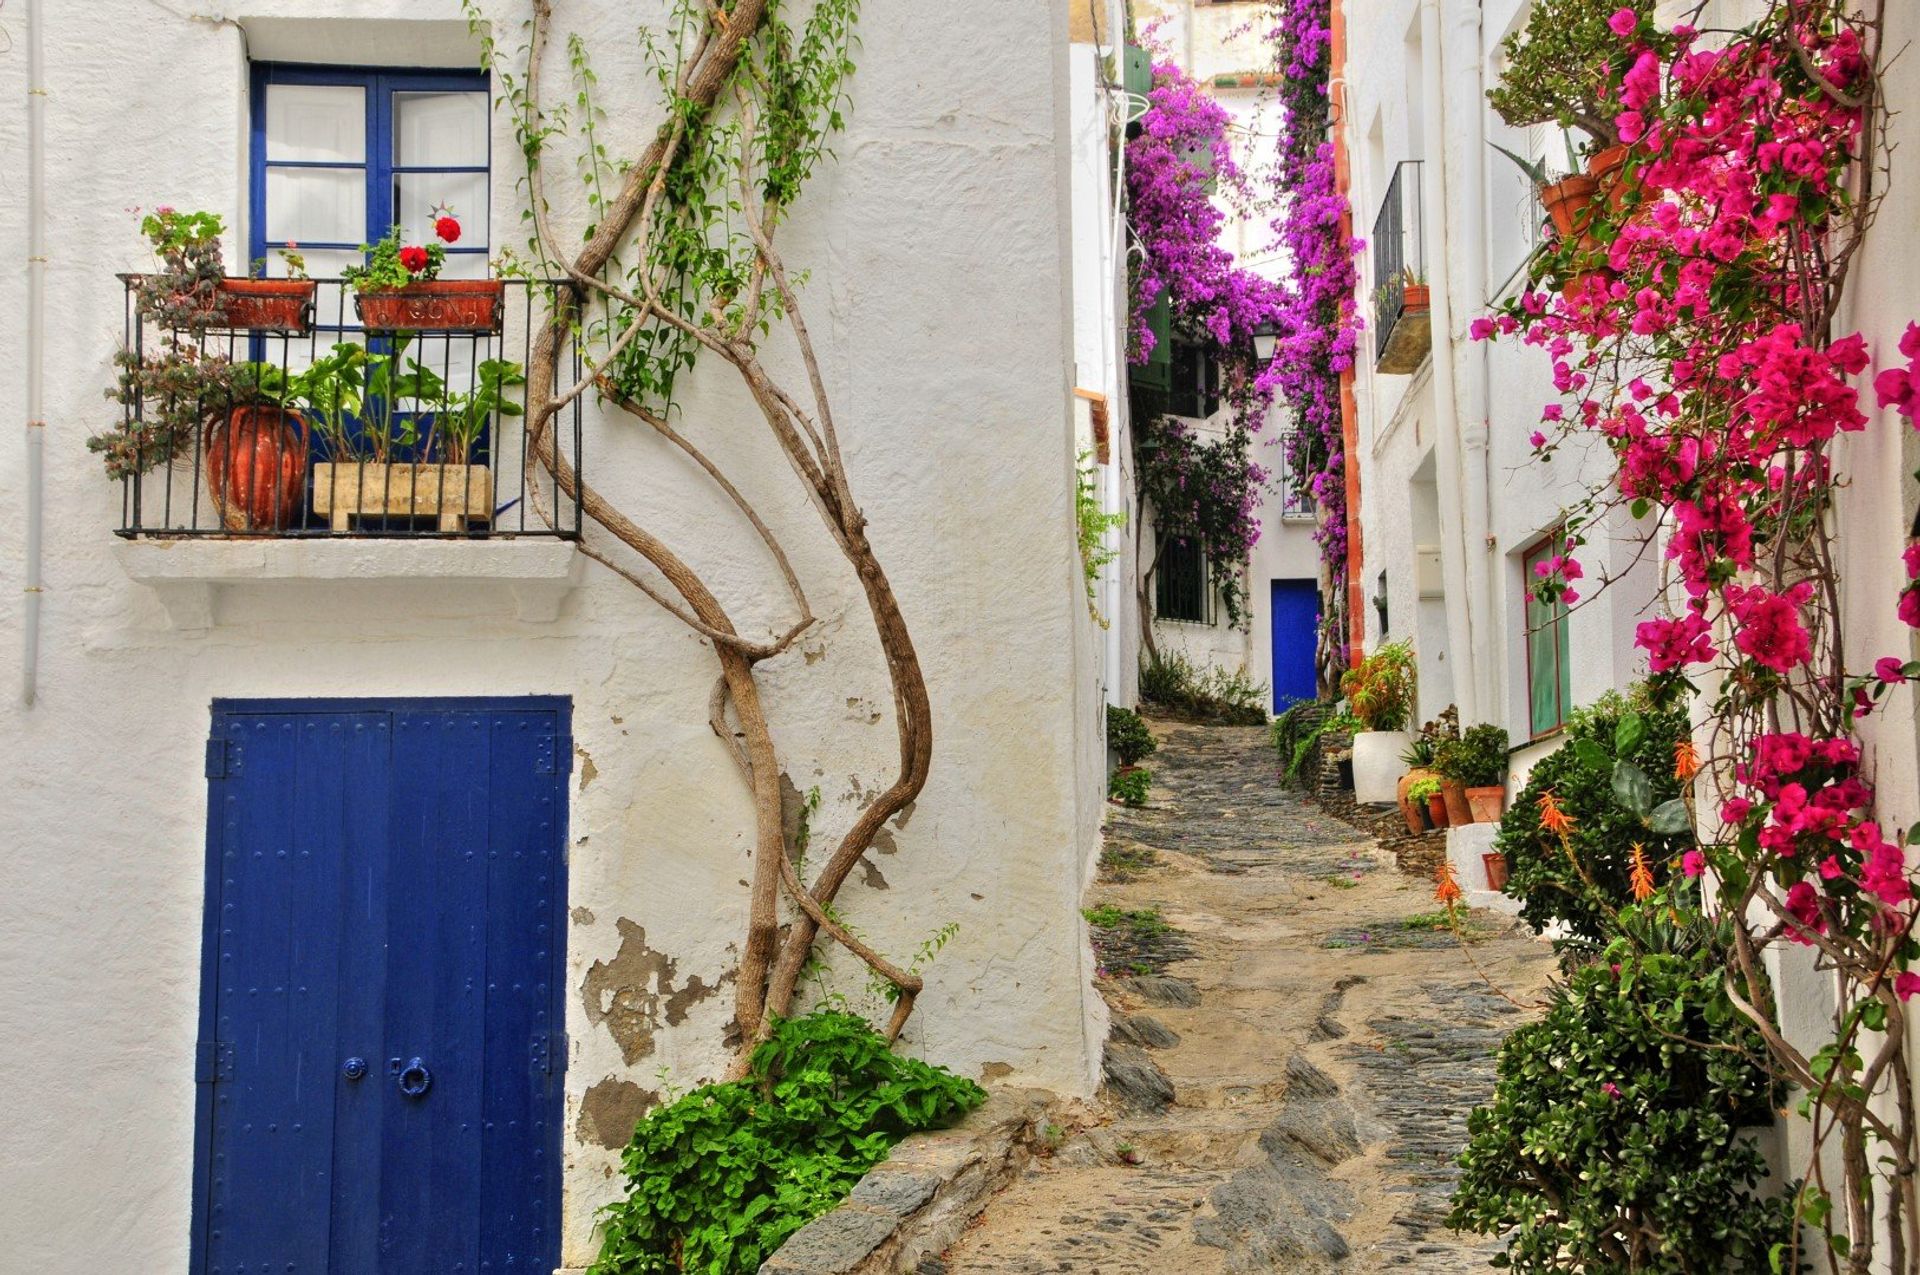 The picturesque whitewashed streets of Cadaqués,  situated on a bay in the middle of the Cap de Creus 